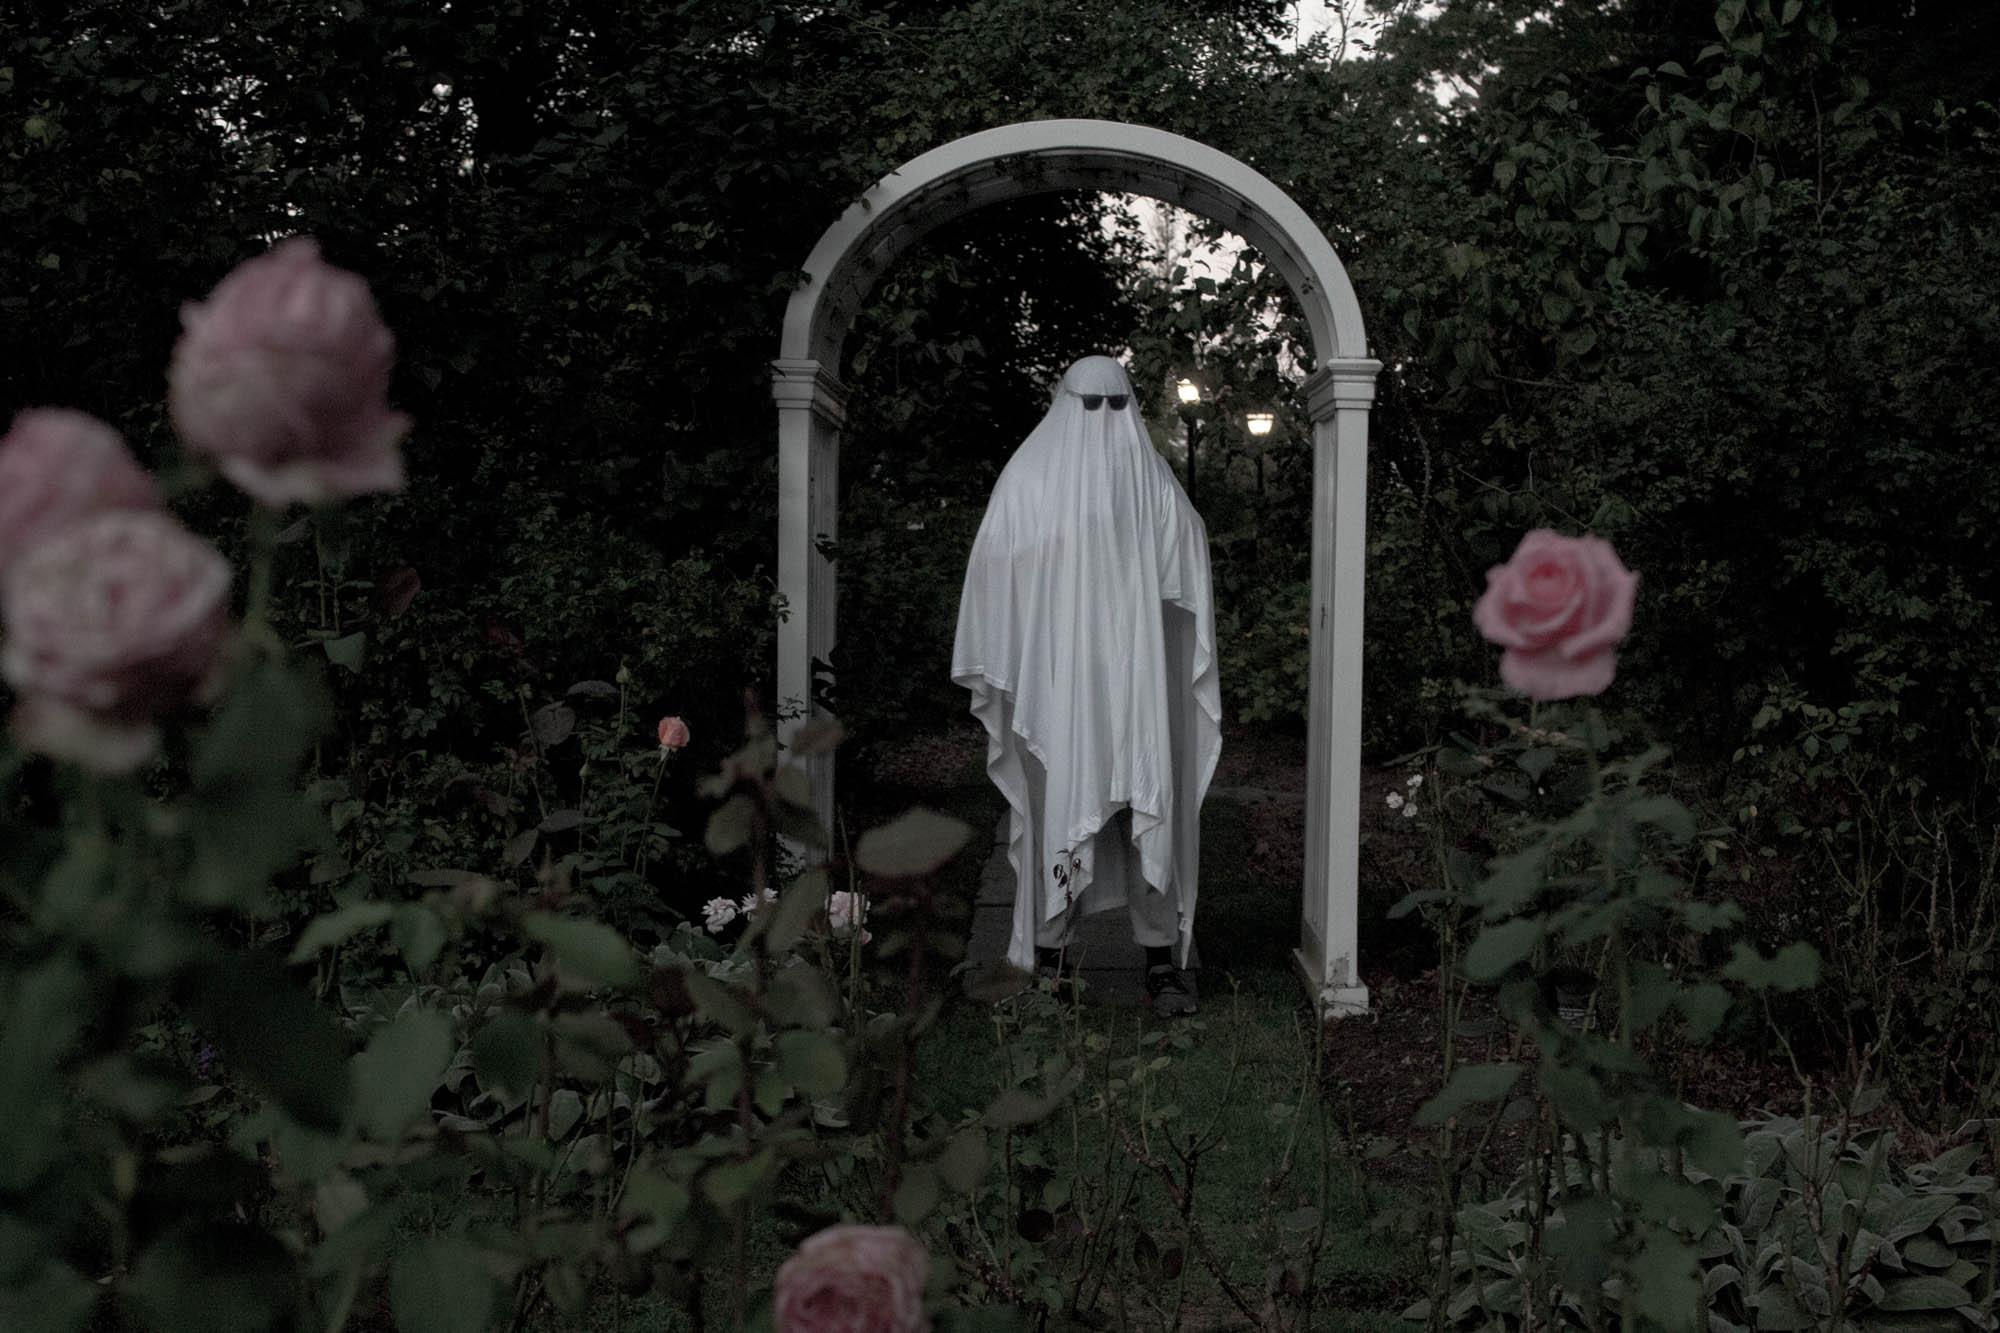 A landscape photo of someone wearing a white bed sheet and sunglasses, made to look like a ghost. There are light pink flowers in the foreground. The background has a whie arched gazebo, lit street lamps and trees. The picture is darkened